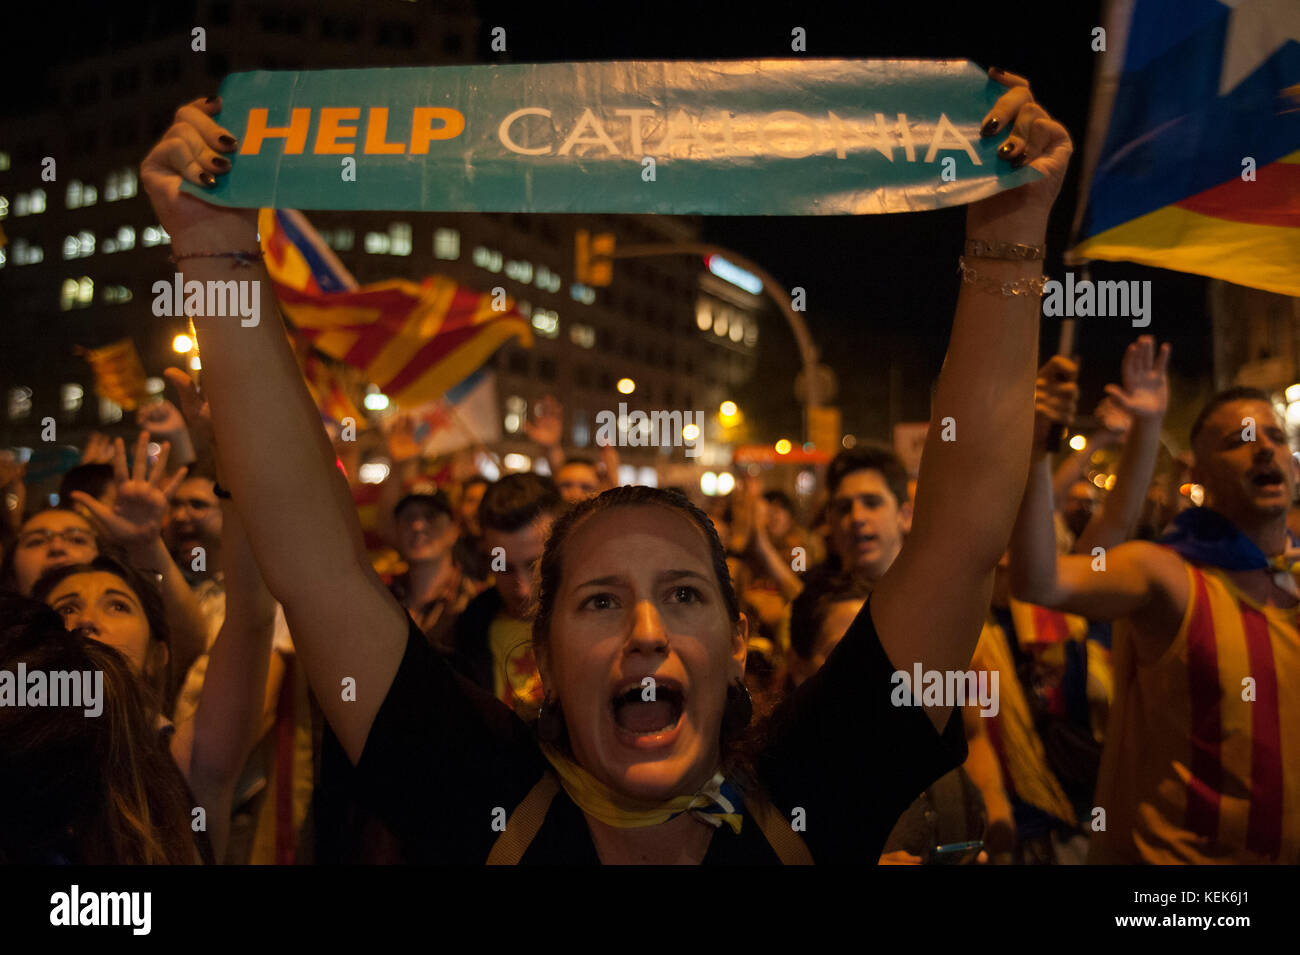 Barcelona, Catalonia. October 21, 2017. Demonstrators take part at a protest against the National Court's decision to imprison civil society leaders, in Barcelona. The Spanish government moved decisively Saturday to use a previously untapped constitutional power so it can take control of Catalonia and derail the independence movement led by separatist politicians in the prosperous industrial region. Credit: Charlie Perez/Alamy Live News Stock Photo